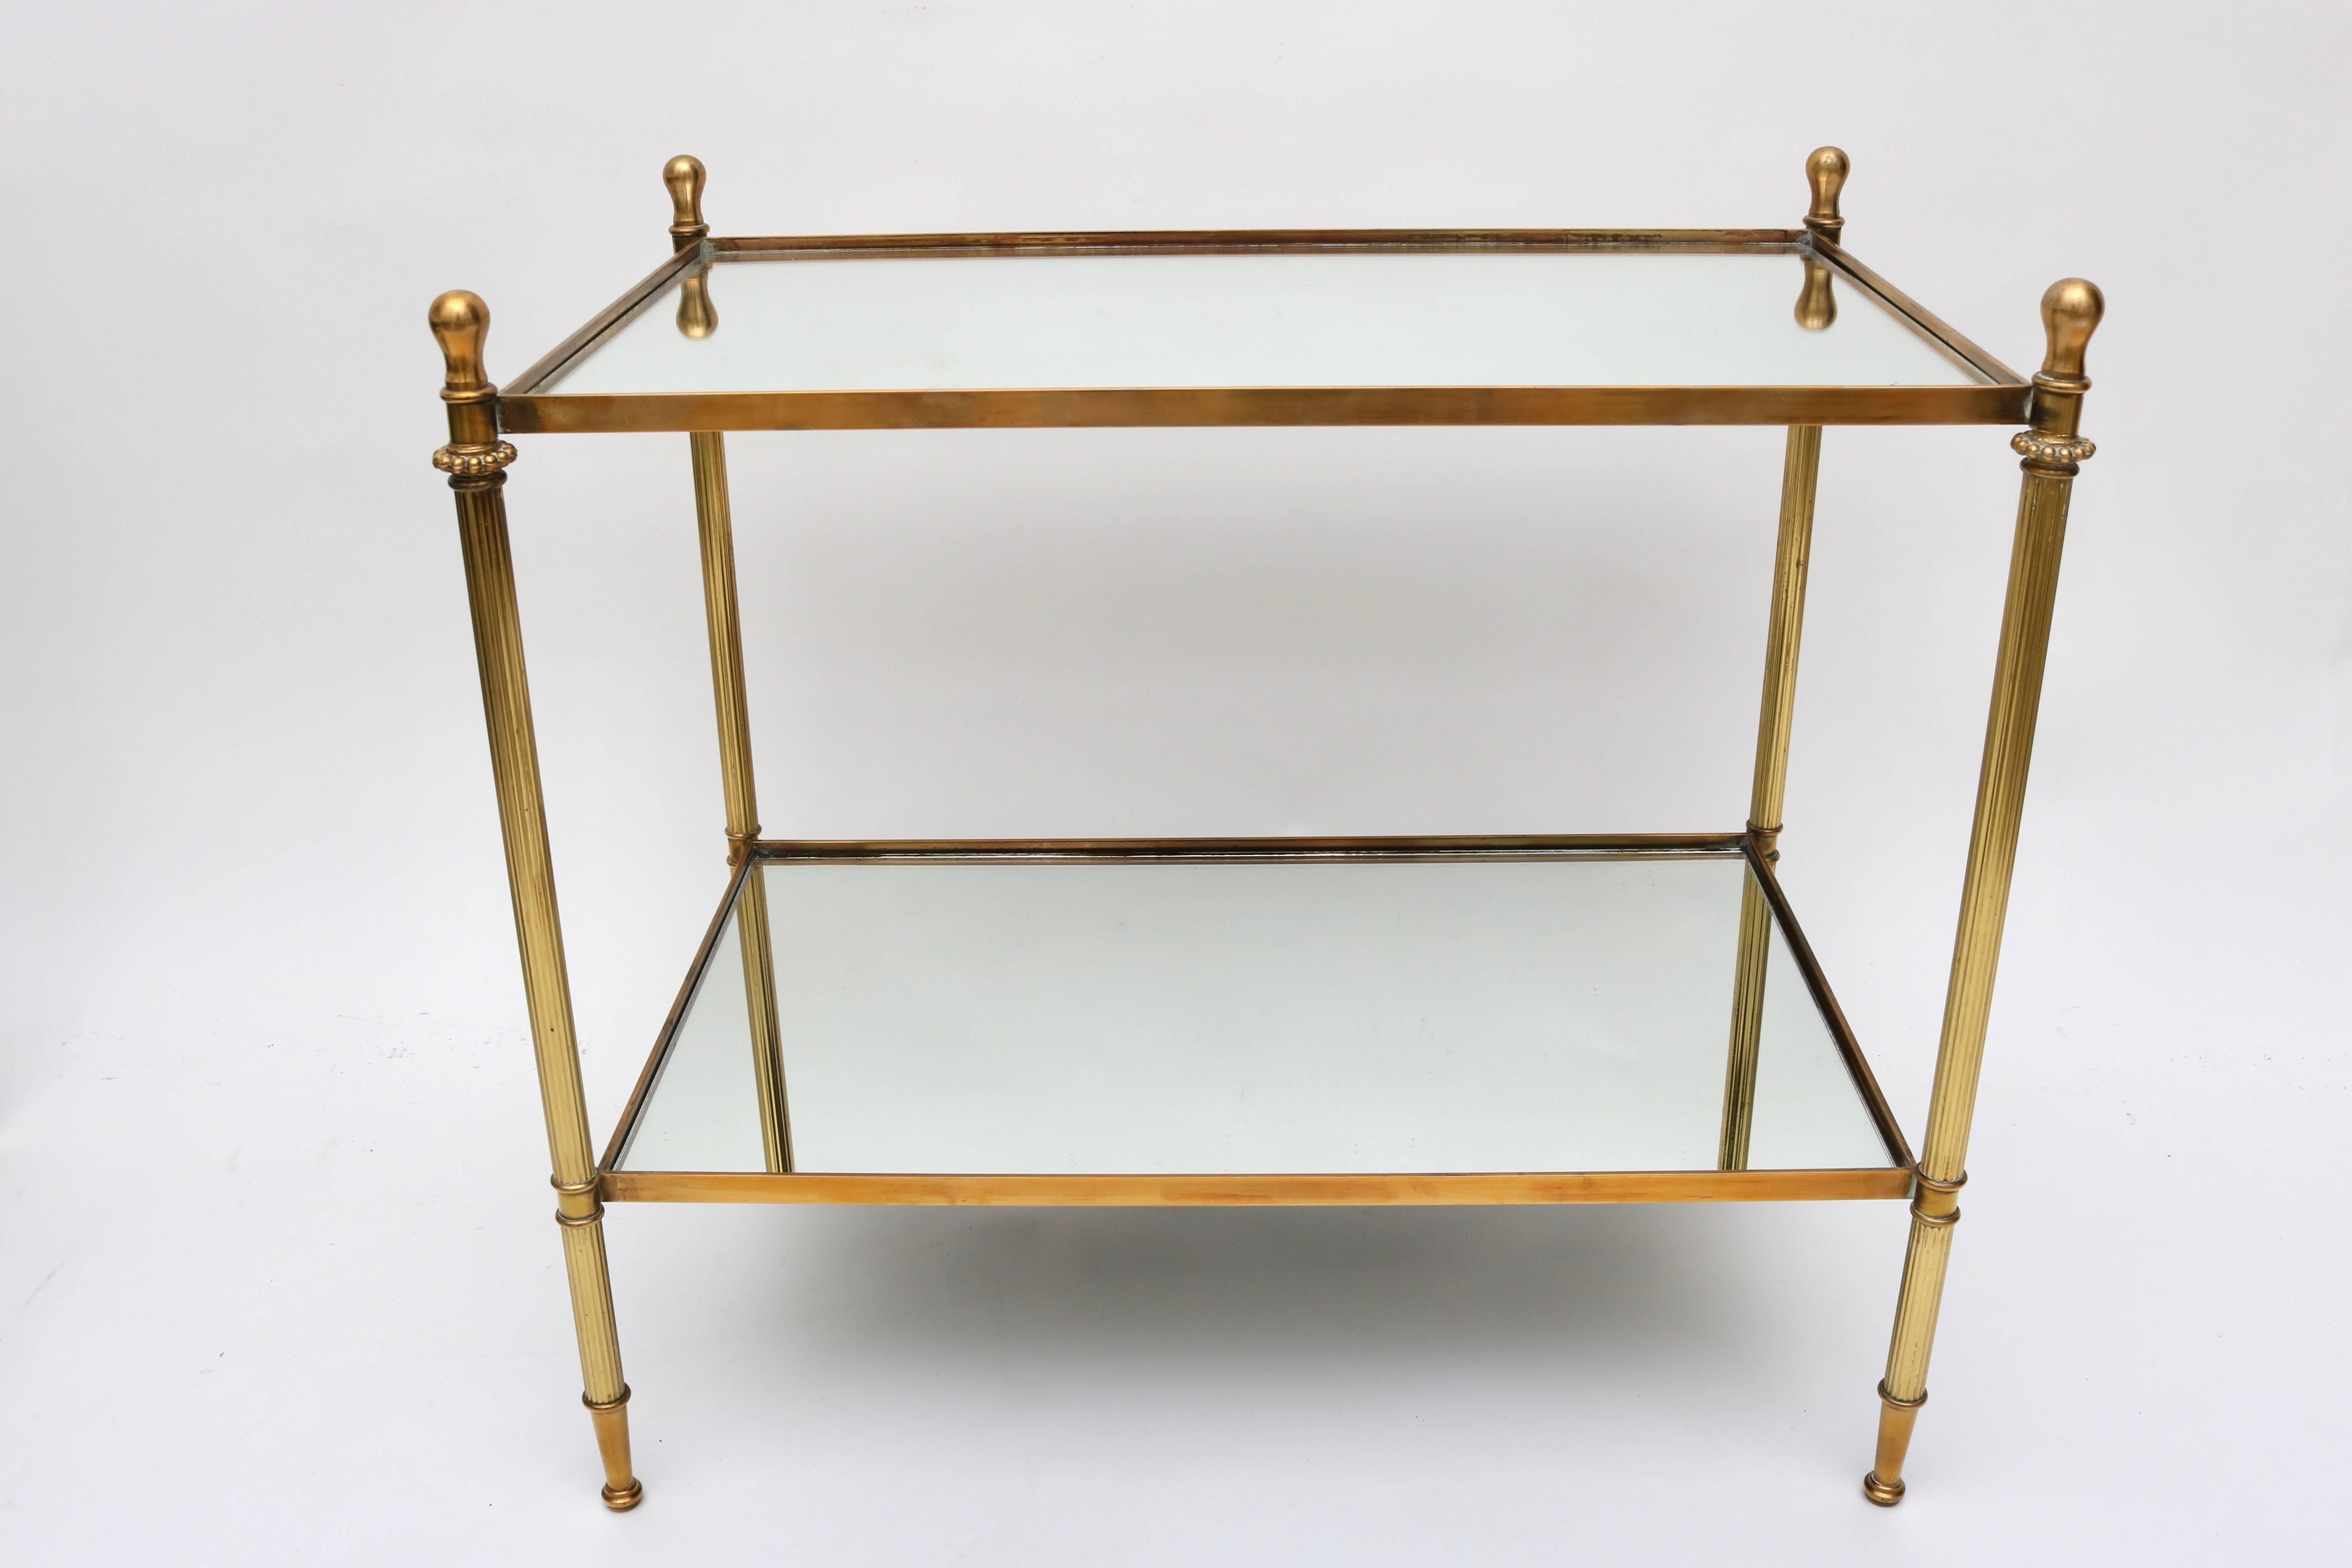 20th Century Pair of Maison Jansen Style Side Tables in Brass and Glass, circa 1930s